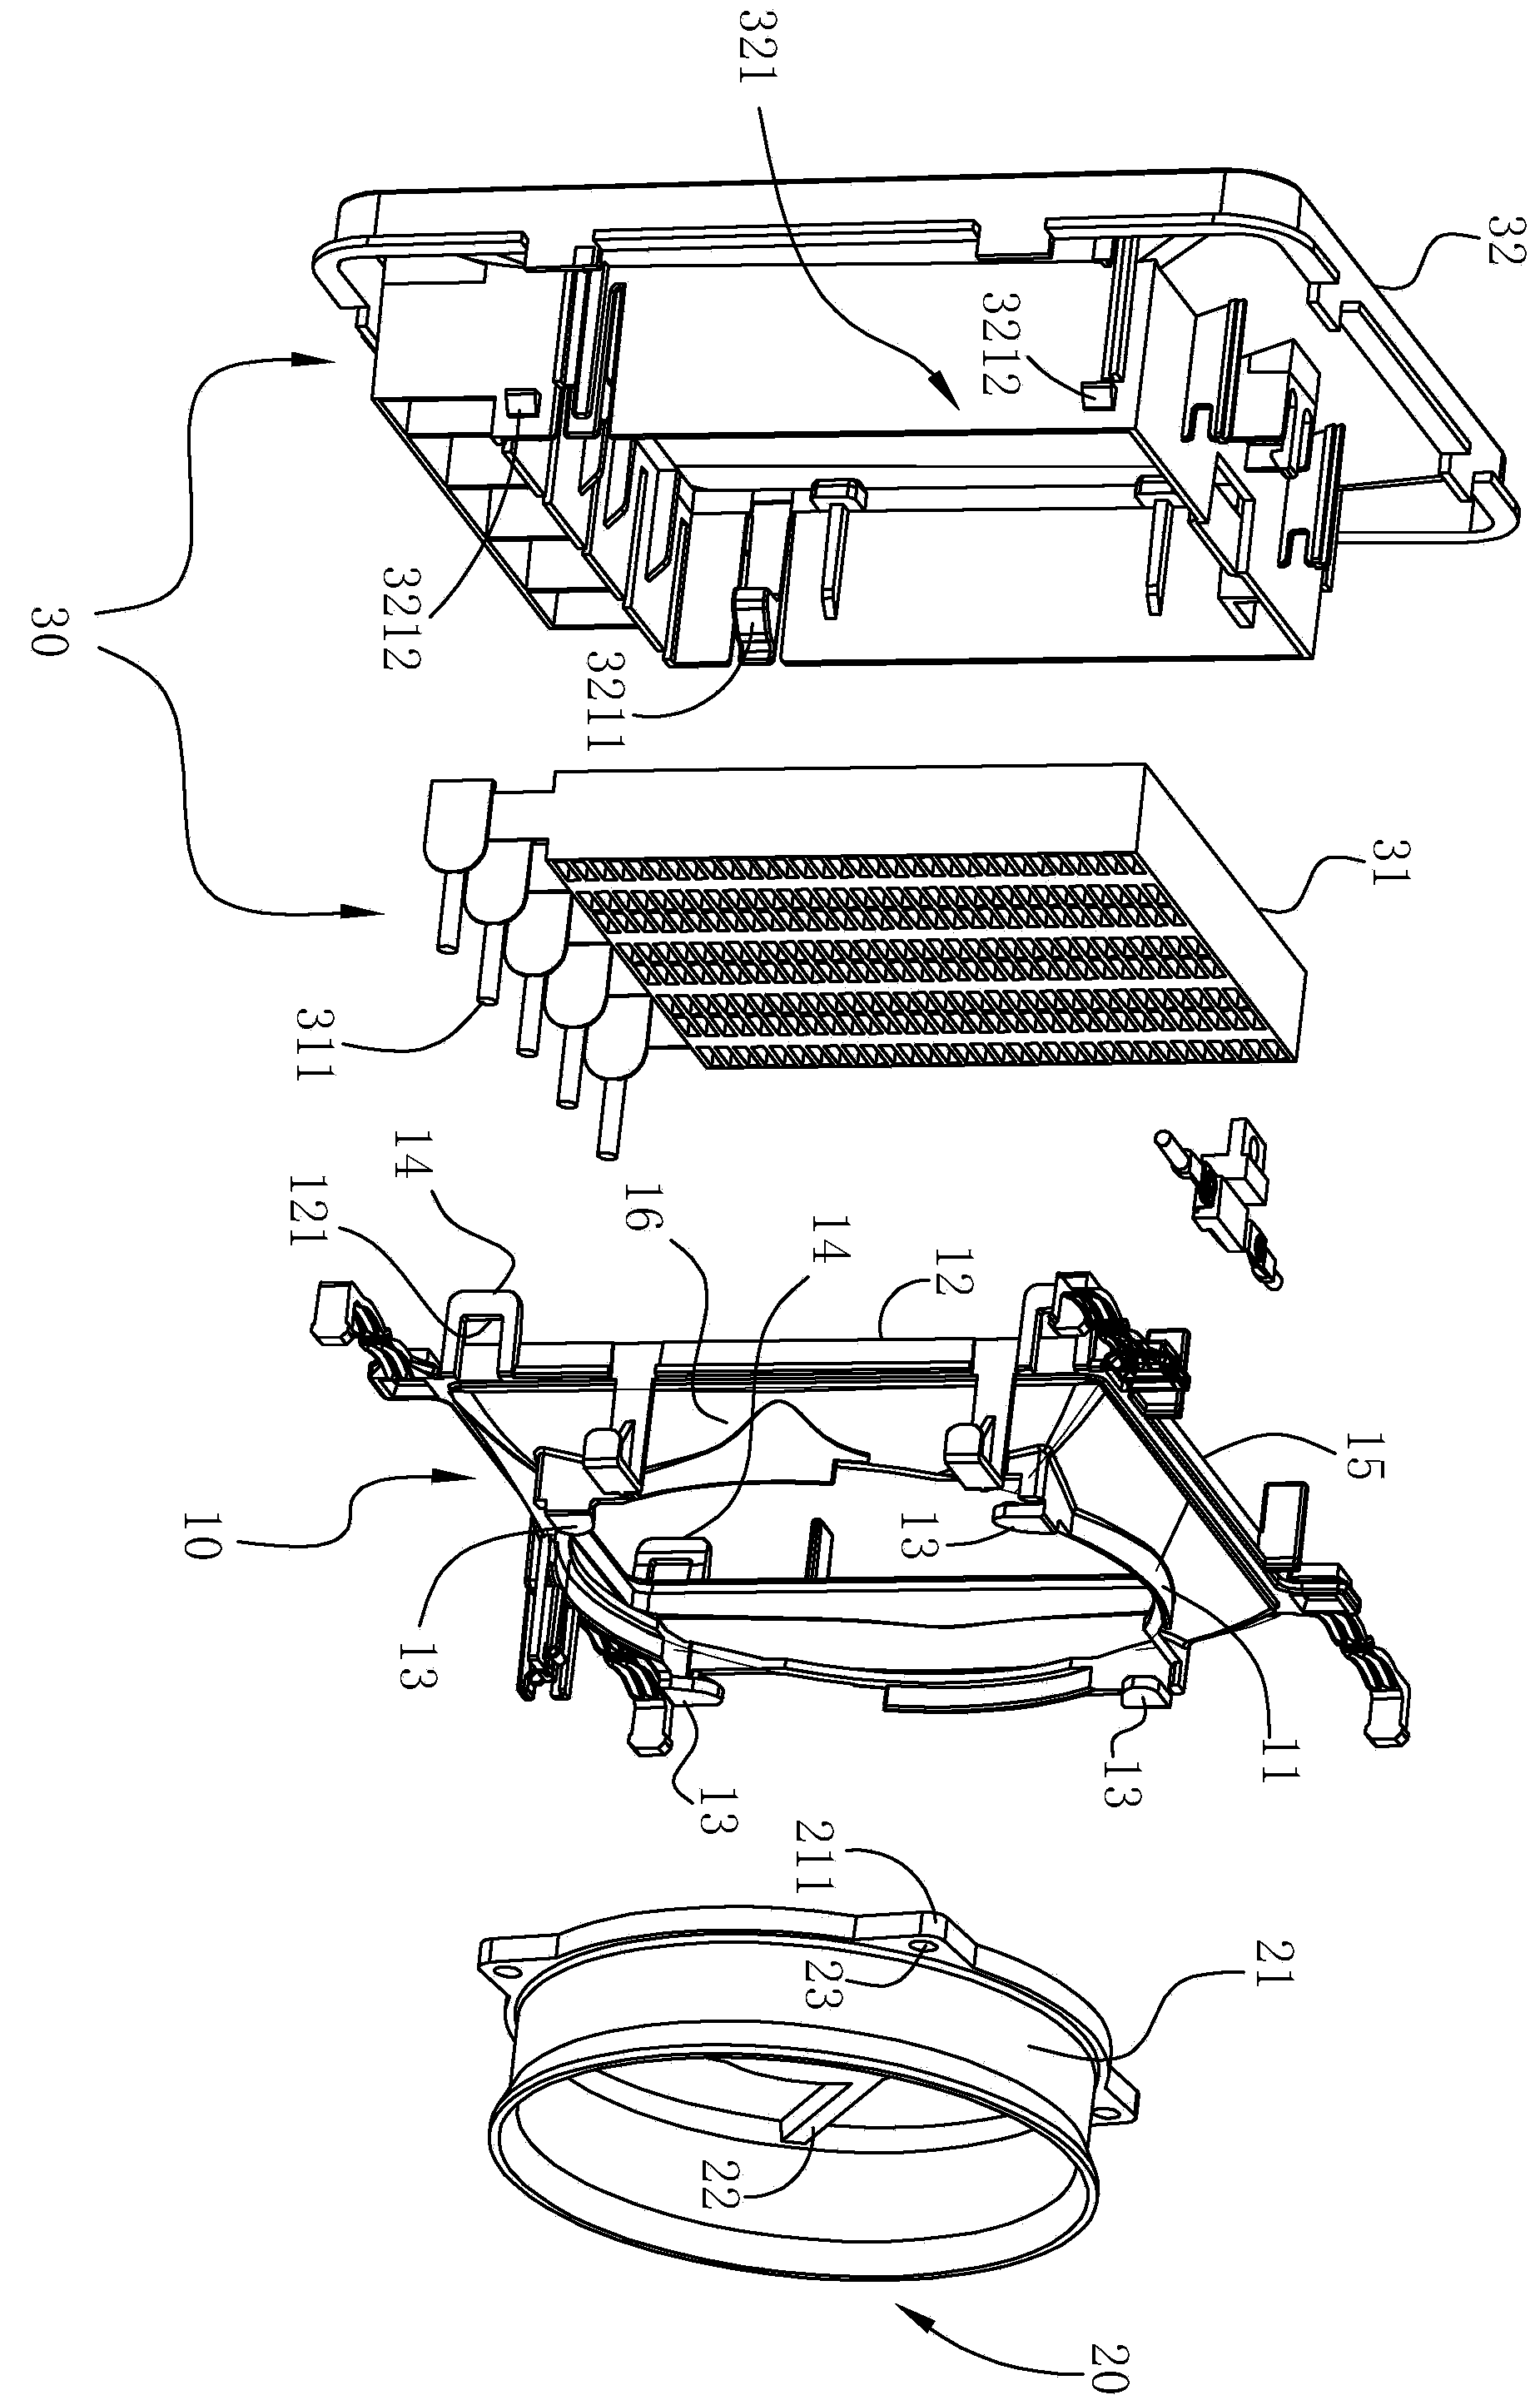 Warm air blower core assembly having variable power